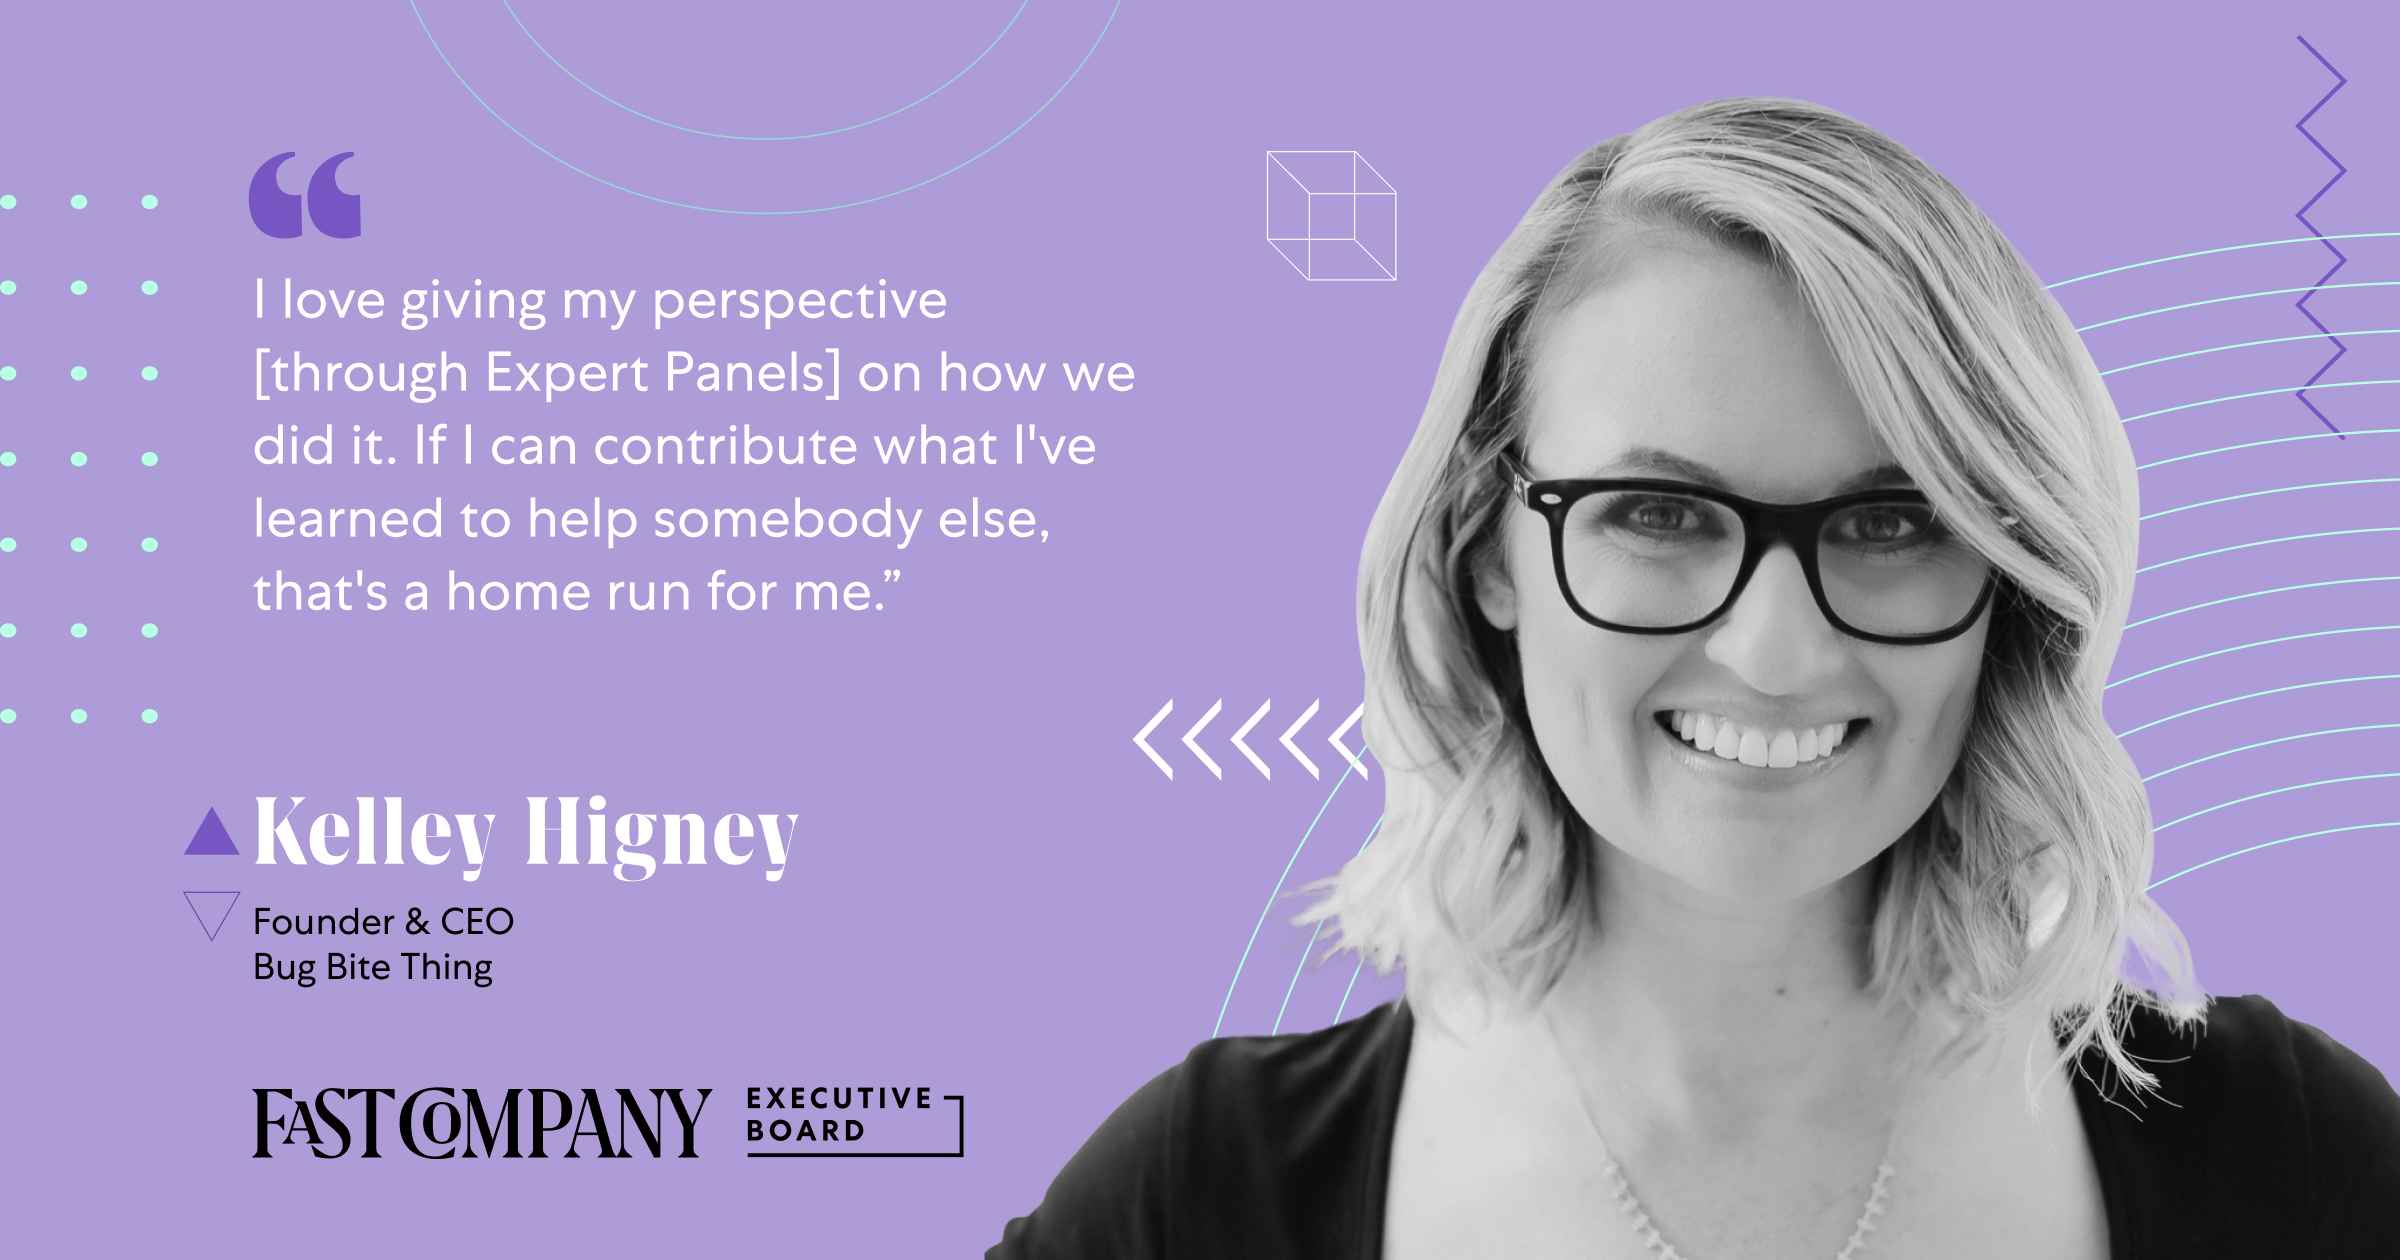 Through Fast Company Executive Board, Kelley Higney Shares Her Perspective to Help Others